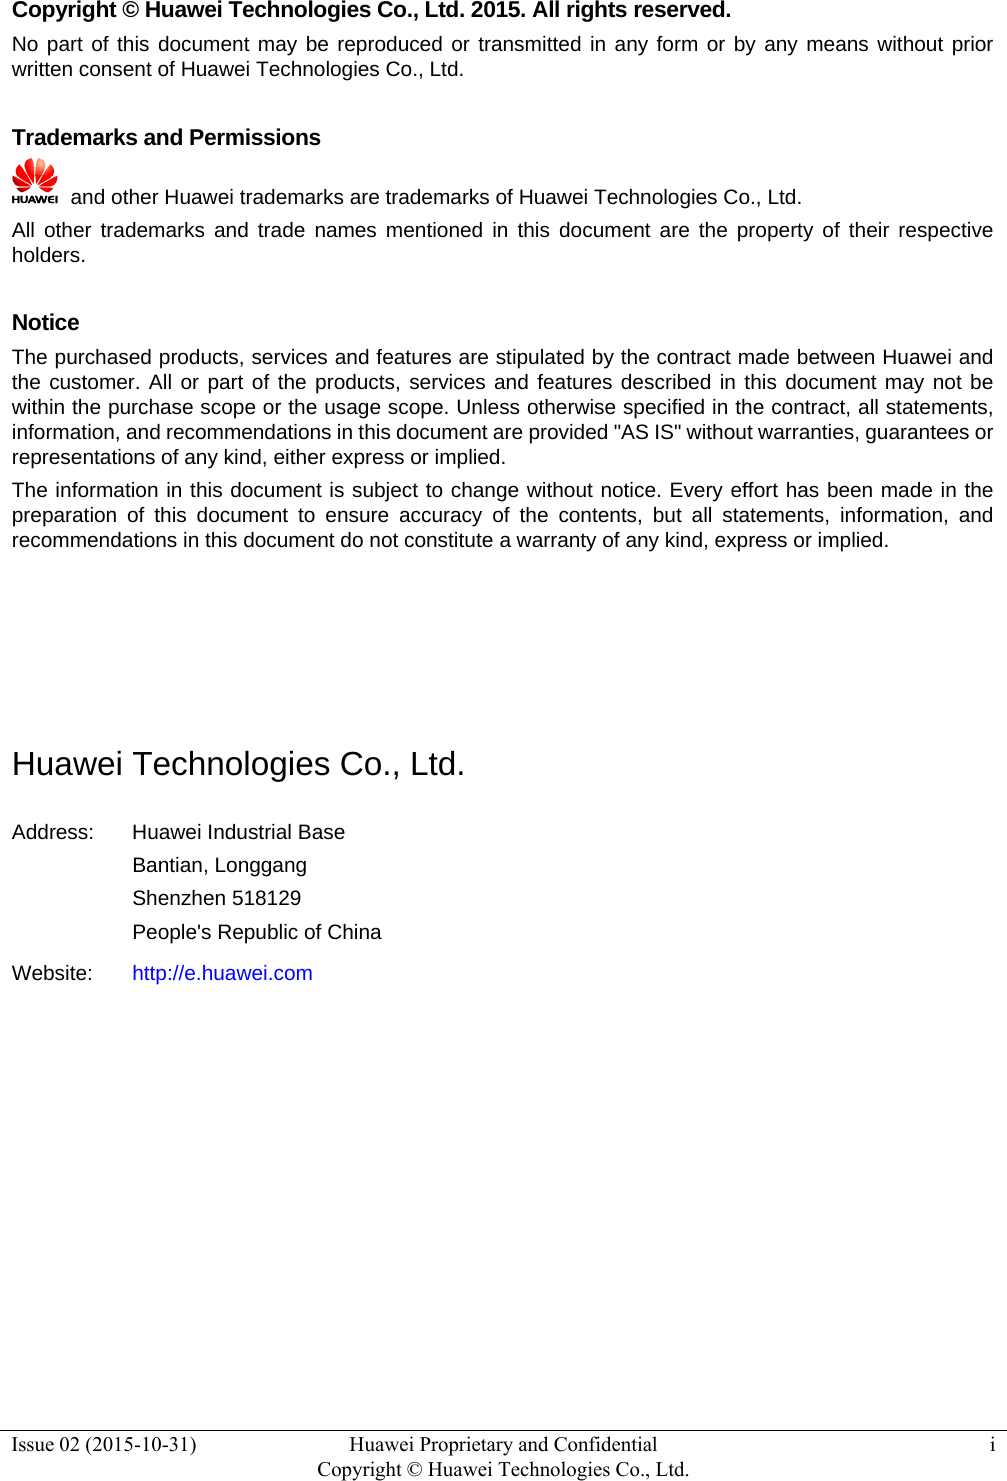  Issue 02 (2015-10-31)  Huawei Proprietary and Confidential         Copyright © Huawei Technologies Co., Ltd.i  Copyright © Huawei Technologies Co., Ltd. 2015. All rights reserved. No part of this document may be reproduced or transmitted in any form or by any means without prior written consent of Huawei Technologies Co., Ltd.  Trademarks and Permissions   and other Huawei trademarks are trademarks of Huawei Technologies Co., Ltd. All other trademarks and trade names mentioned in this document are the property of their respective holders.  Notice The purchased products, services and features are stipulated by the contract made between Huawei and the customer. All or part of the products, services and features described in this document may not be within the purchase scope or the usage scope. Unless otherwise specified in the contract, all statements, information, and recommendations in this document are provided &quot;AS IS&quot; without warranties, guarantees or representations of any kind, either express or implied. The information in this document is subject to change without notice. Every effort has been made in the preparation of this document to ensure accuracy of the contents, but all statements, information, and recommendations in this document do not constitute a warranty of any kind, express or implied.     Huawei Technologies Co., Ltd. Address:  Huawei Industrial Base Bantian, Longgang Shenzhen 518129 People&apos;s Republic of China Website:  http://e.huawei.com          